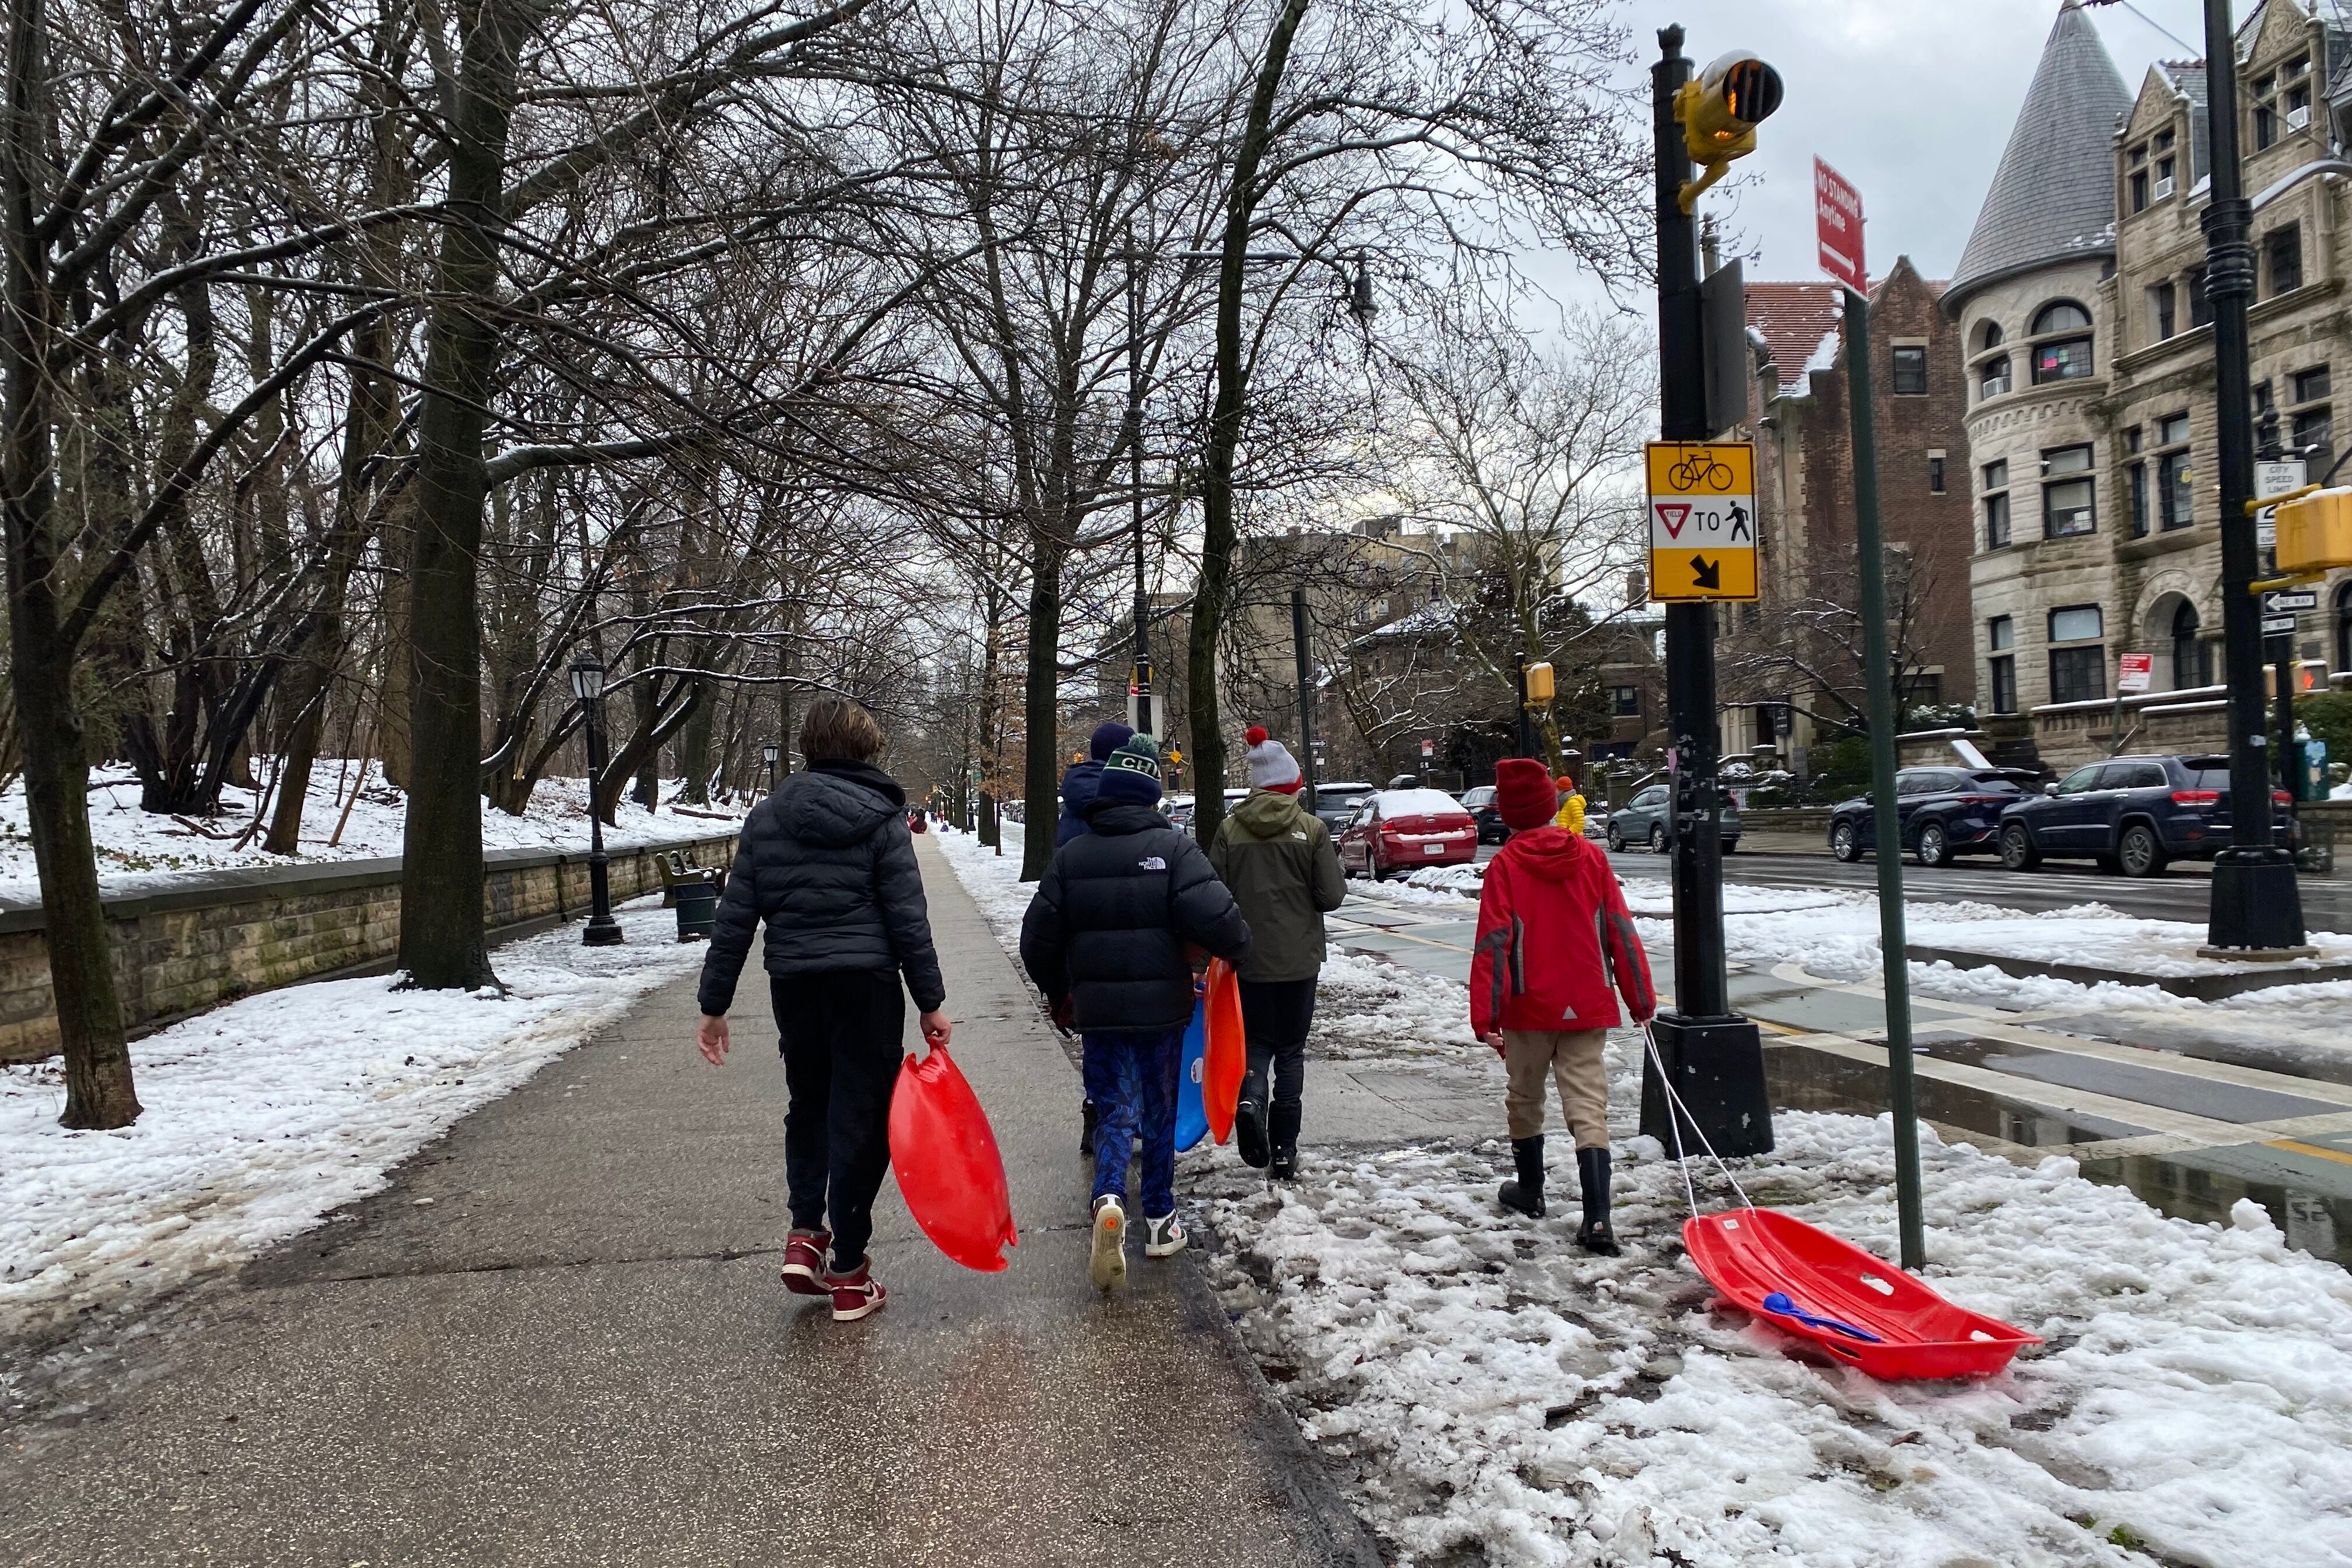 A group of children in winter gear with sleds walking on a sidewalk without much snow.